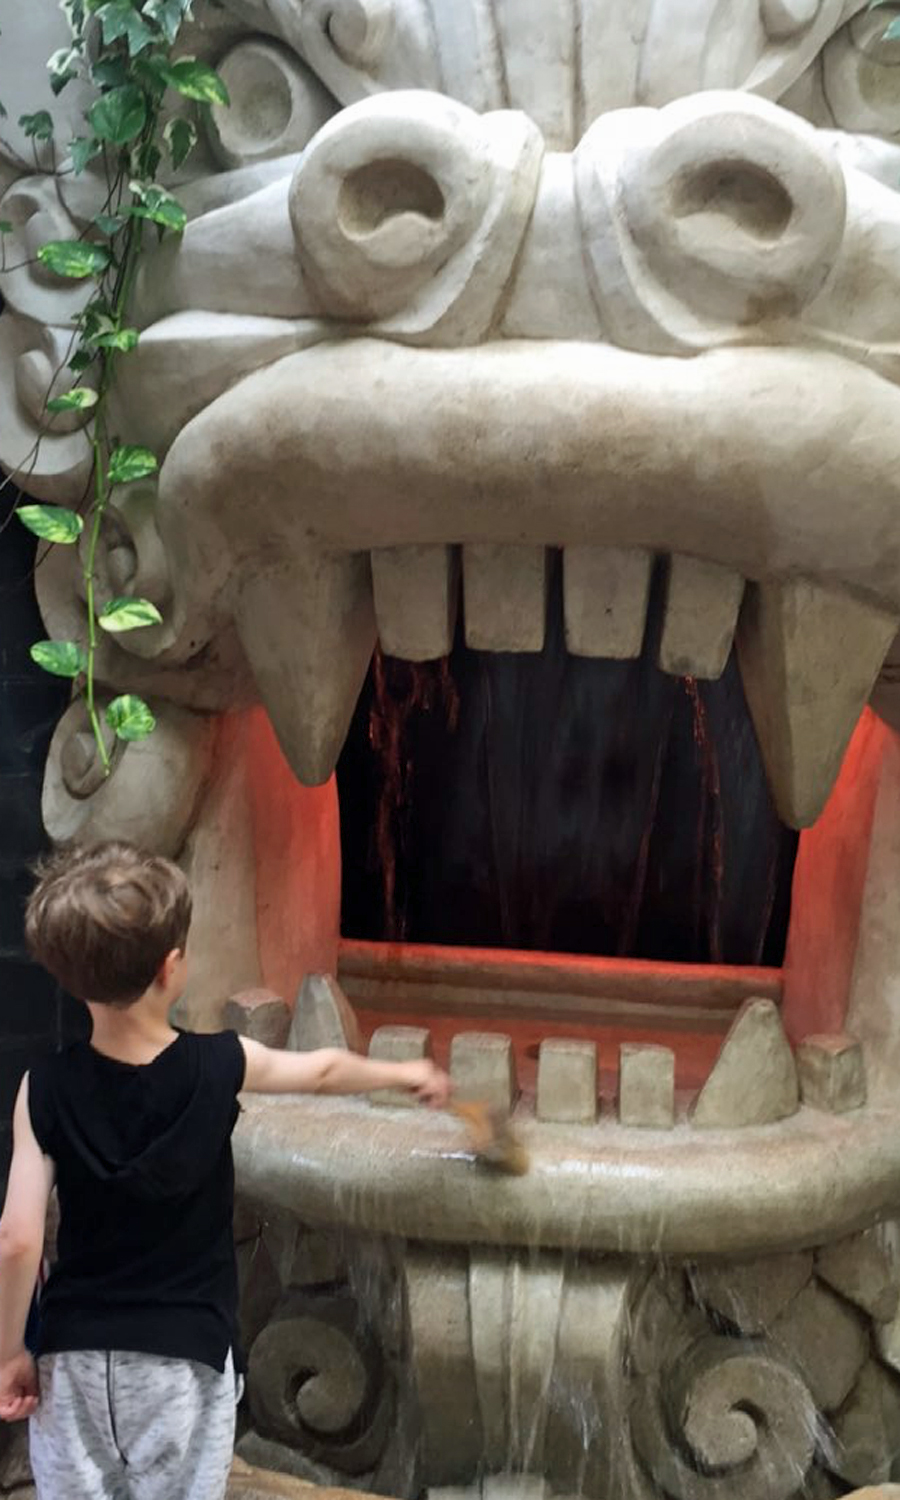 Kid's play zone at Longwood Gardens complete with interactive dragon painting!